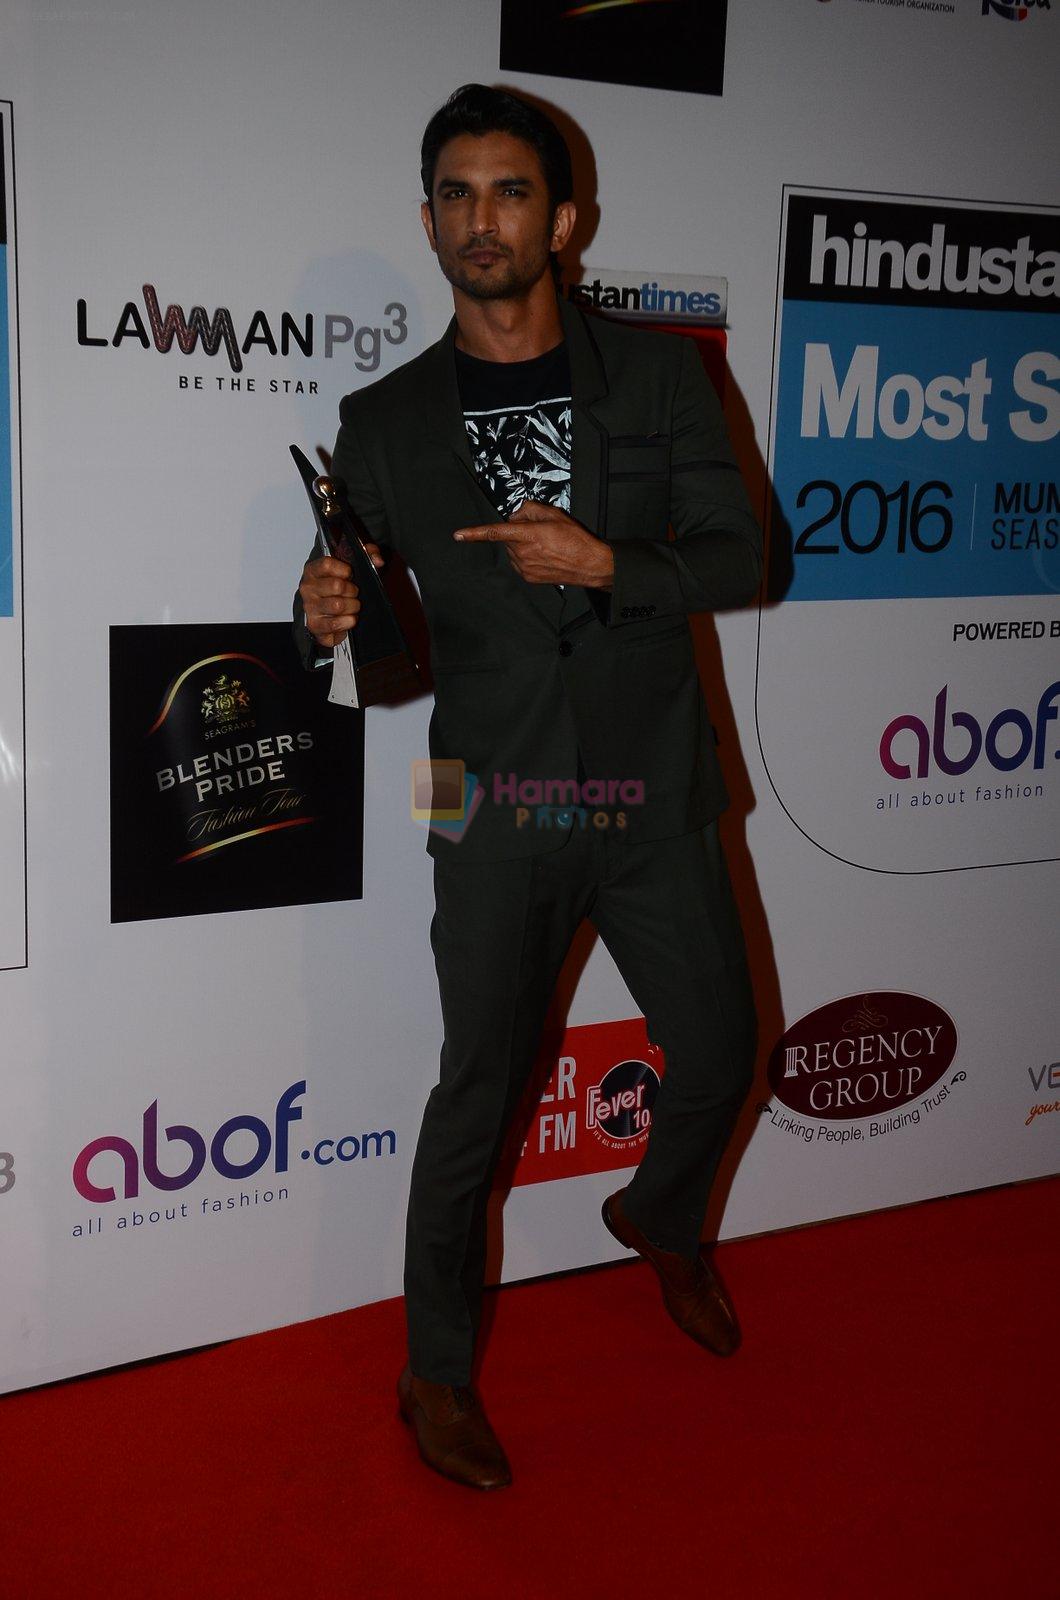 Sushant Singh Rajput at HT Most Stylish on 20th March 2016